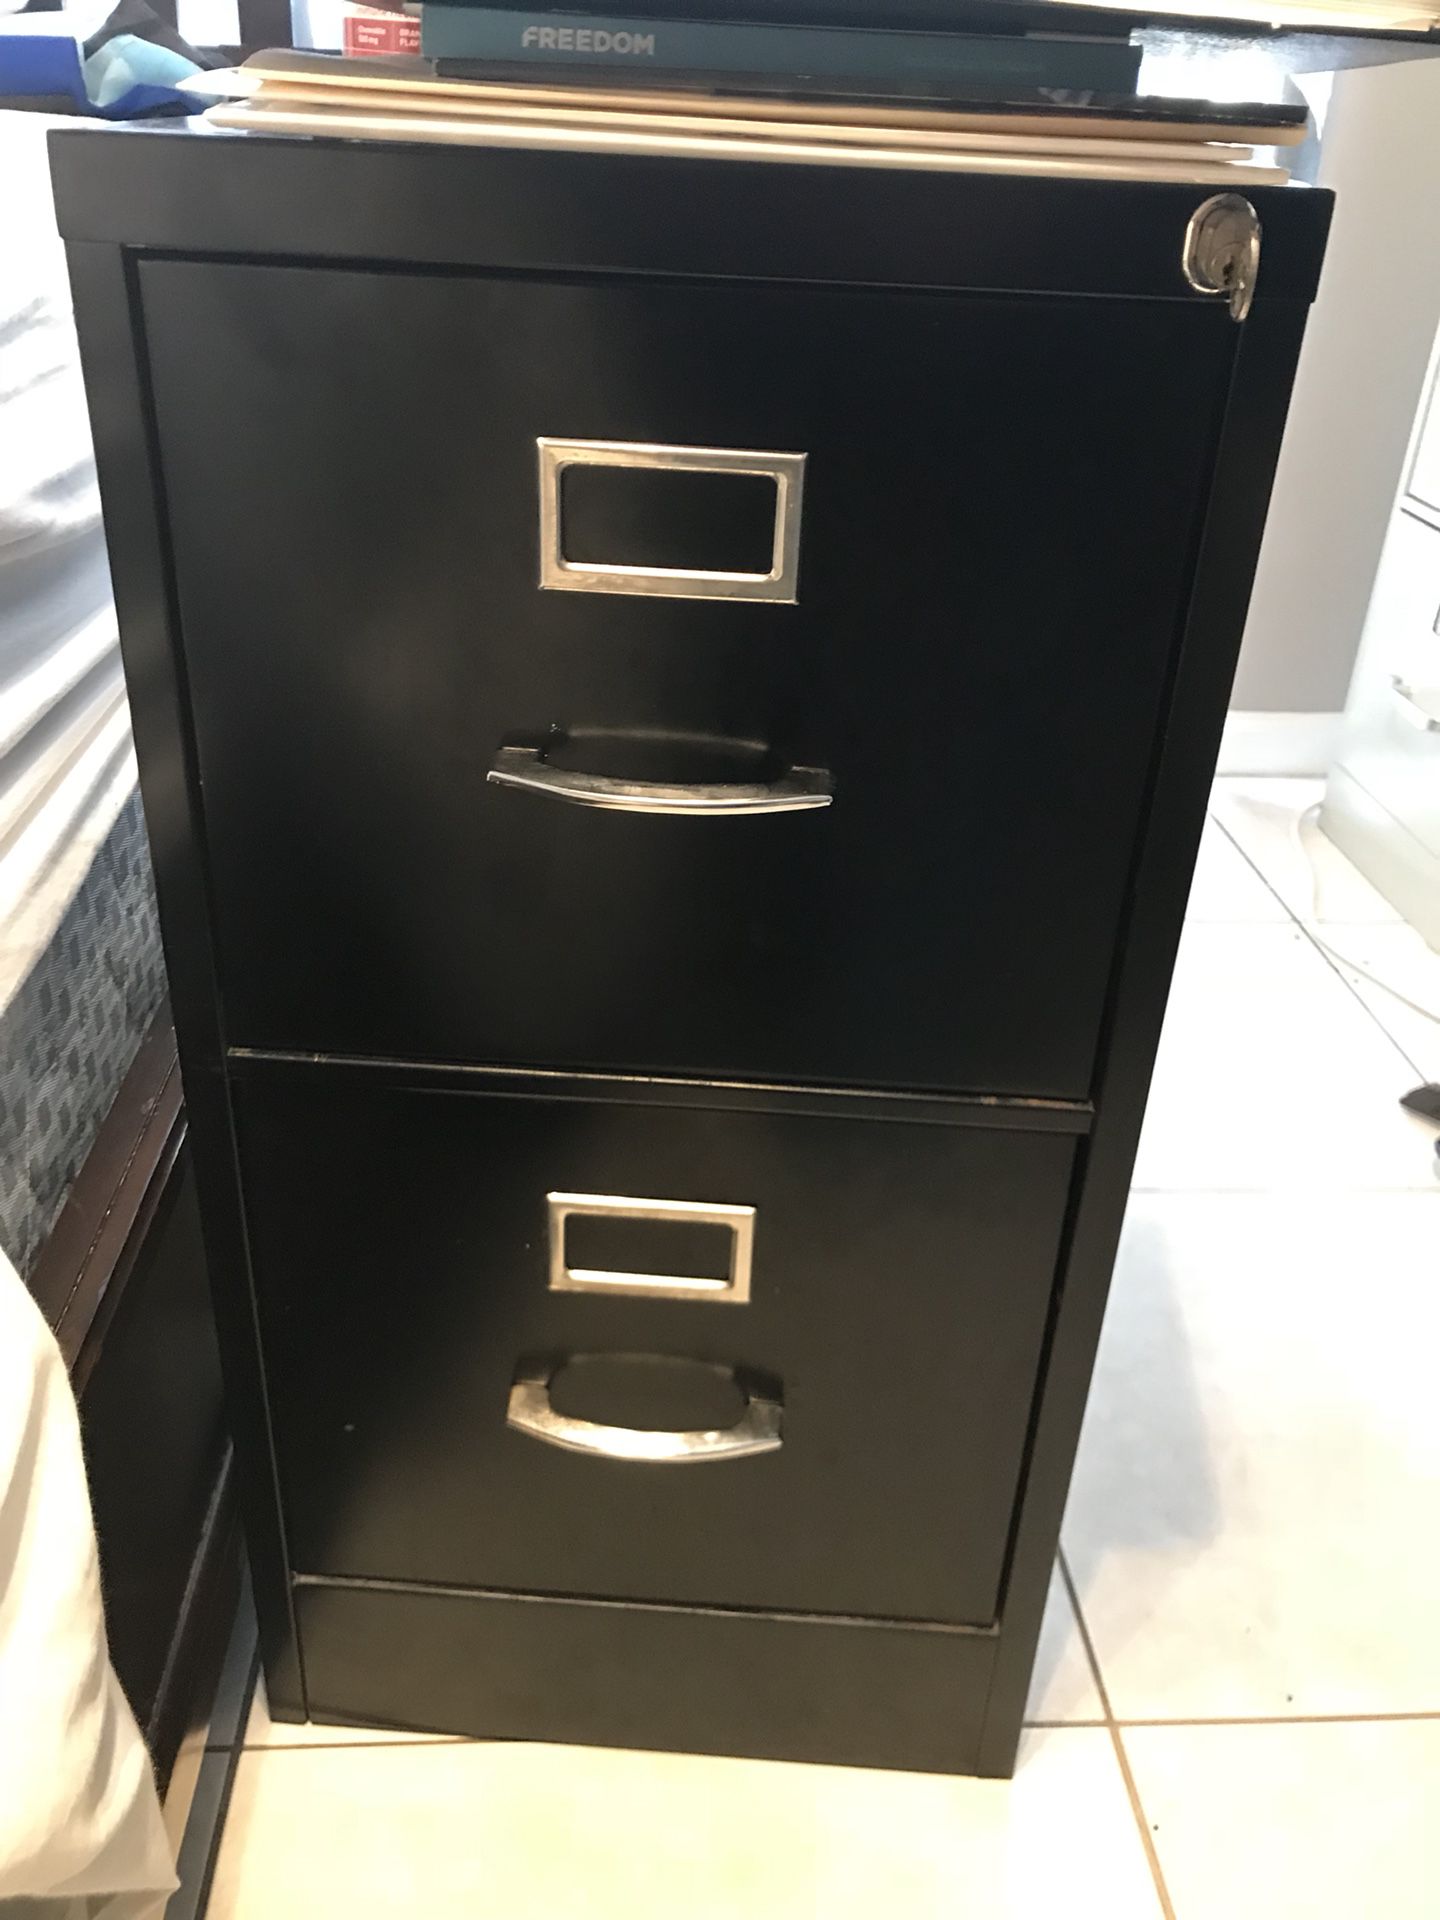 3 file cabinets for sale. 2 drawer. 2 have keys. 1 has 3rd small pullout drawer